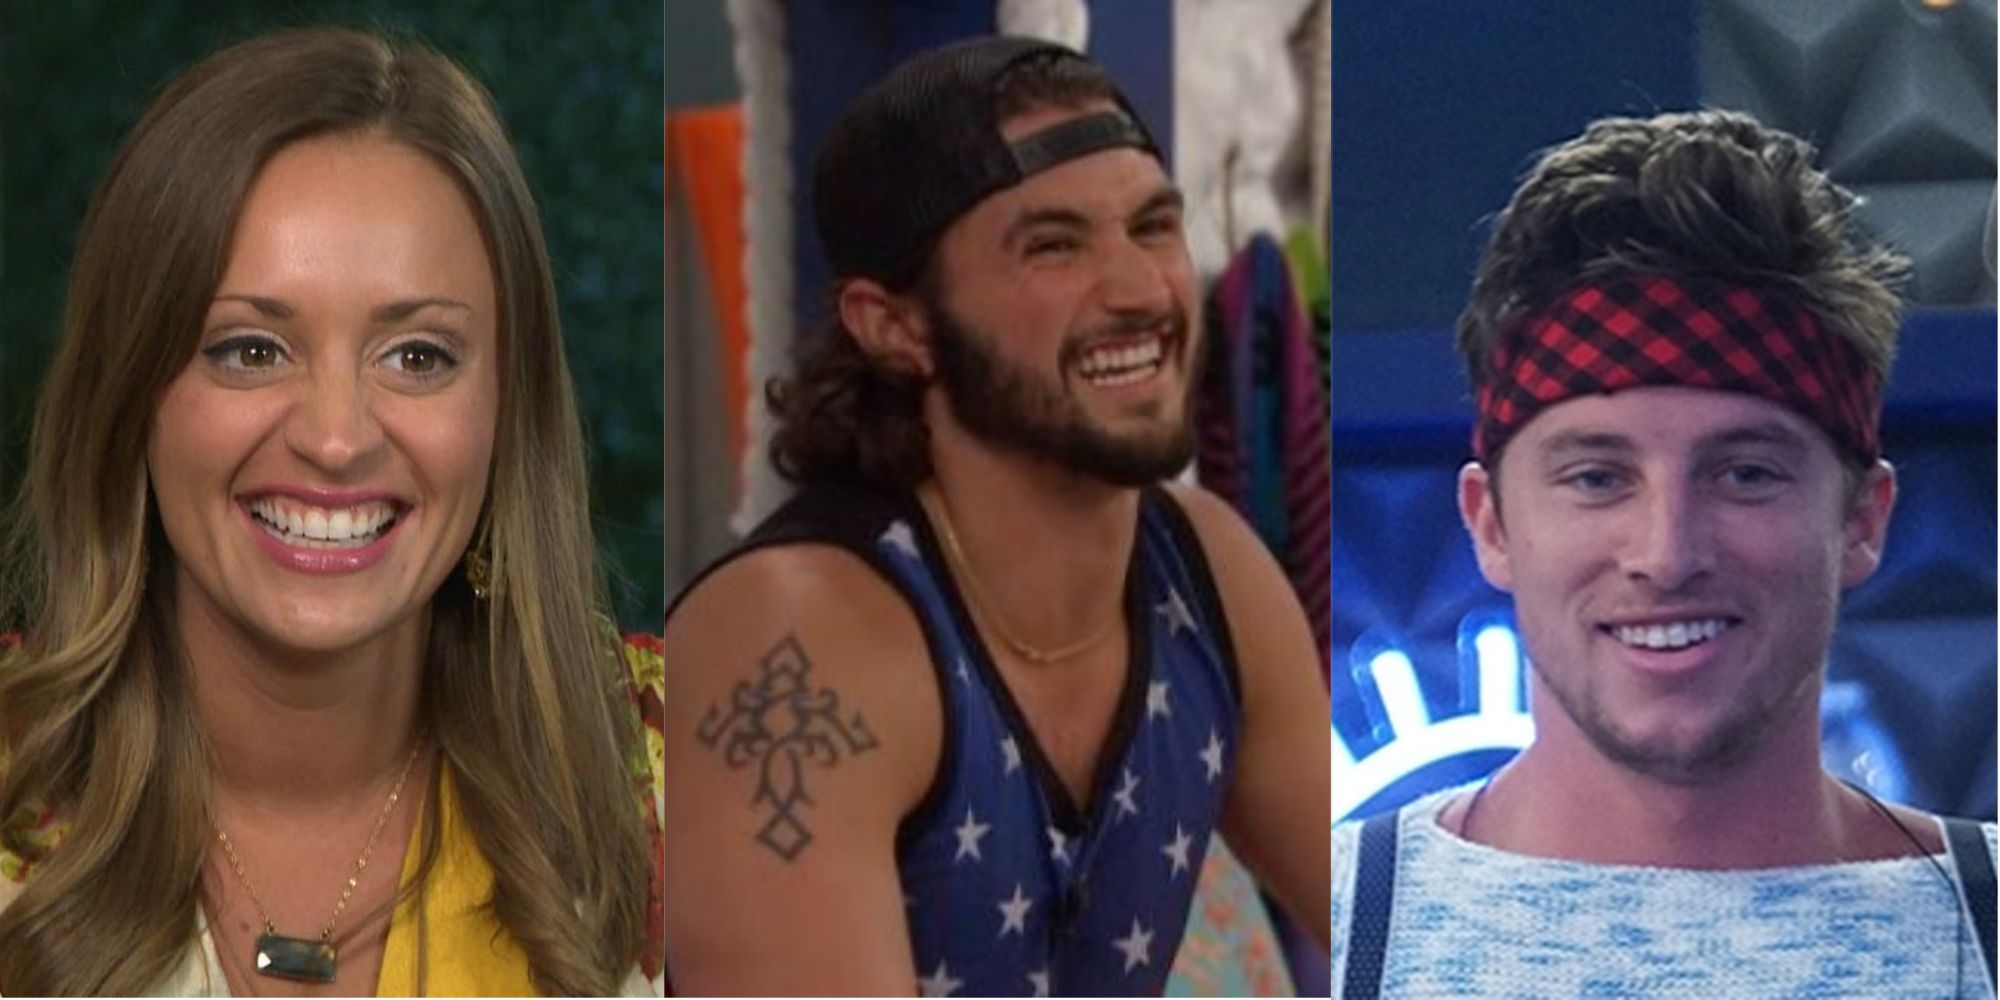 big brother fan favorites kaitlyn, victor, and brett all smiling and joyous.